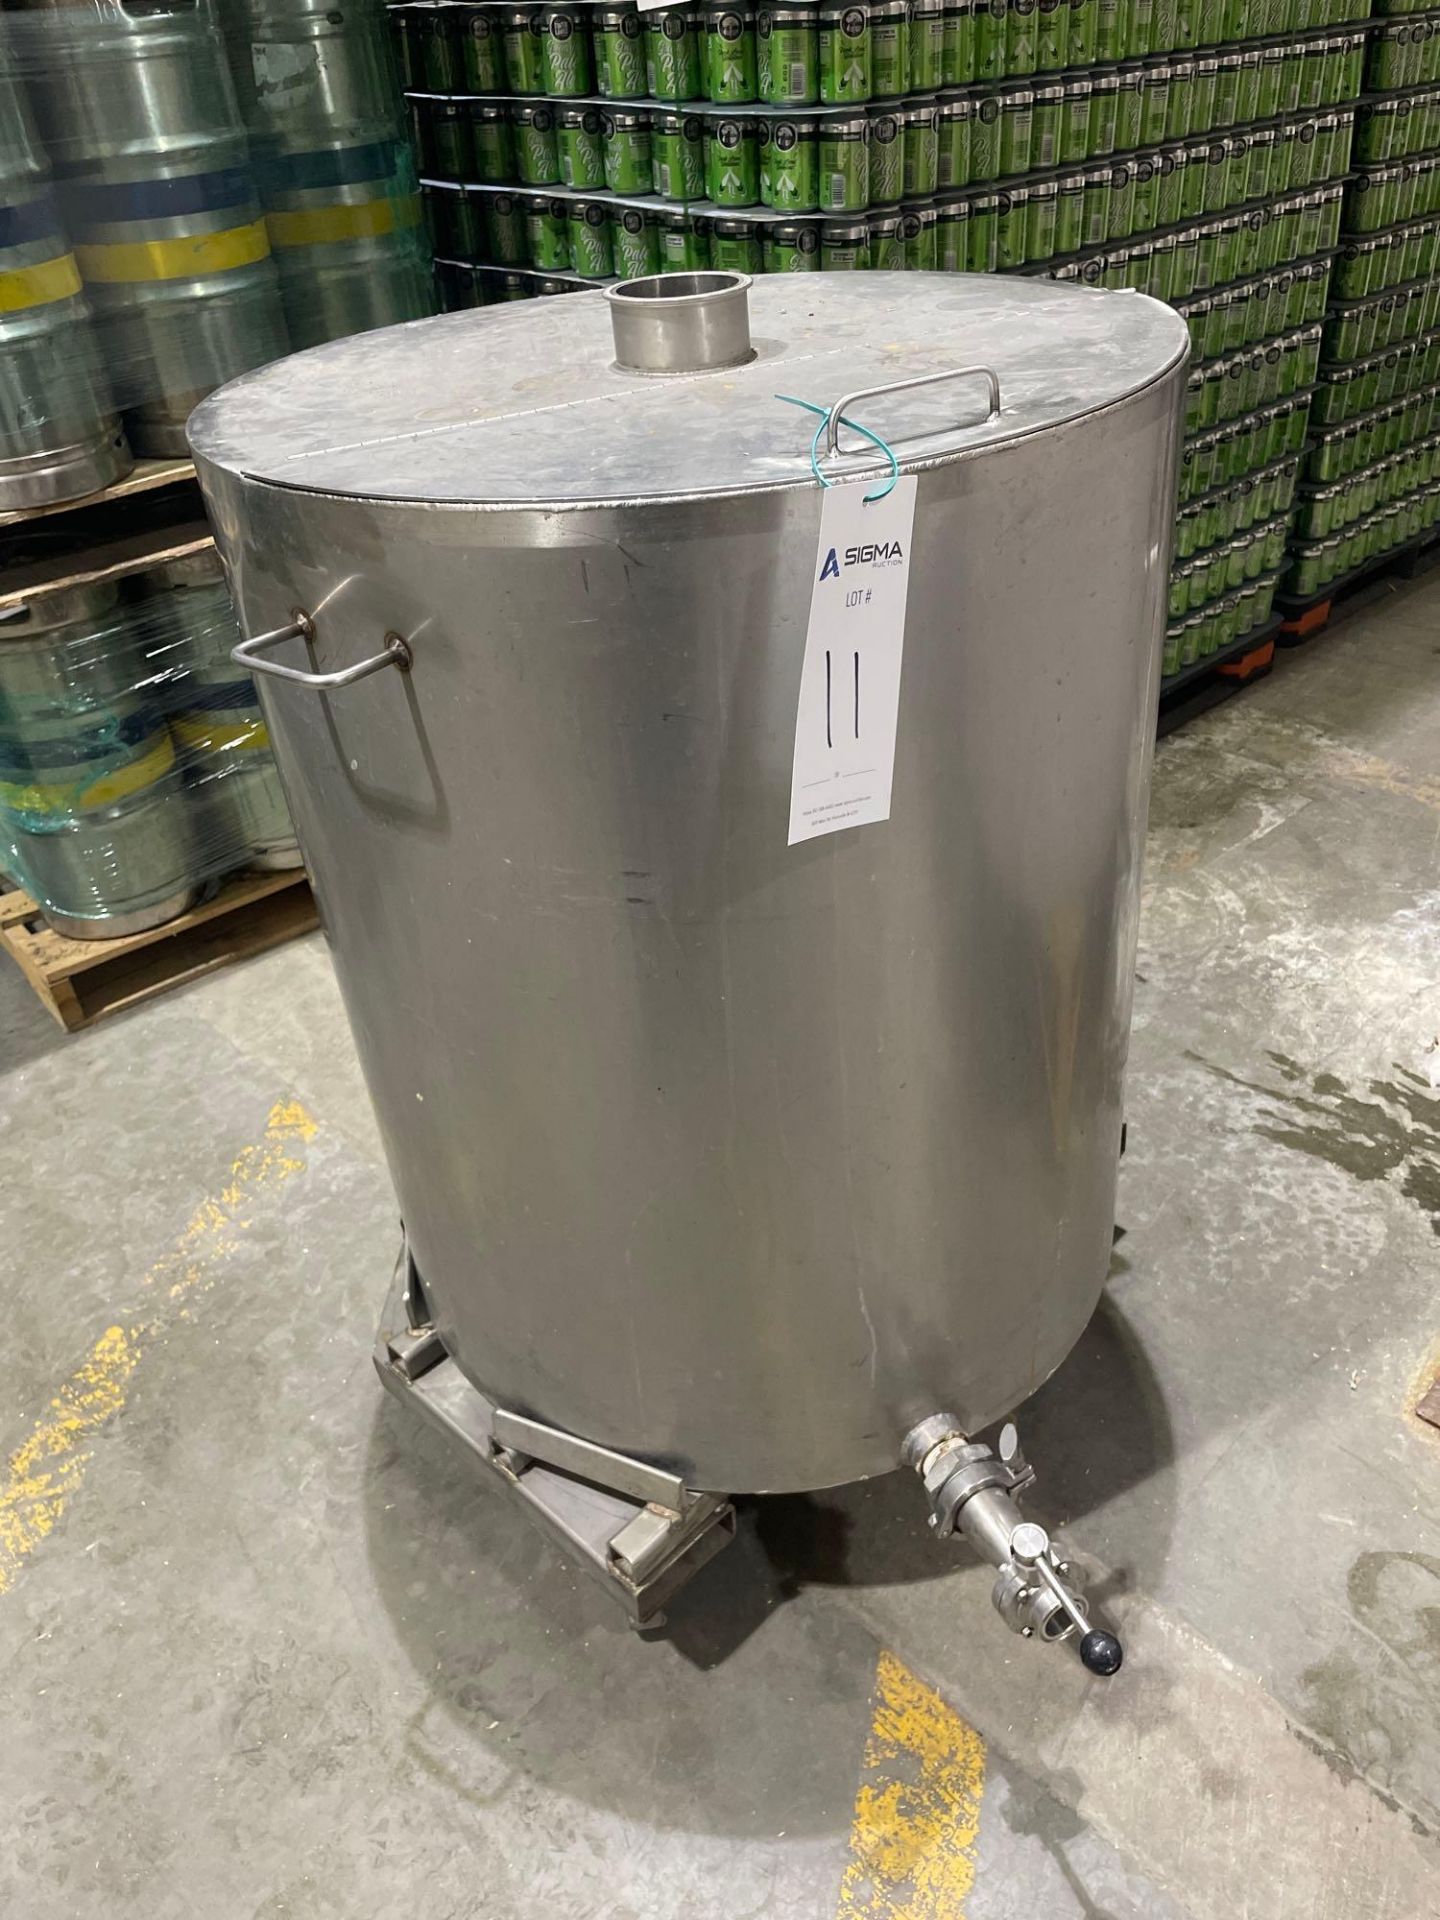 Stainless Steel Holding Tank w/ Casters